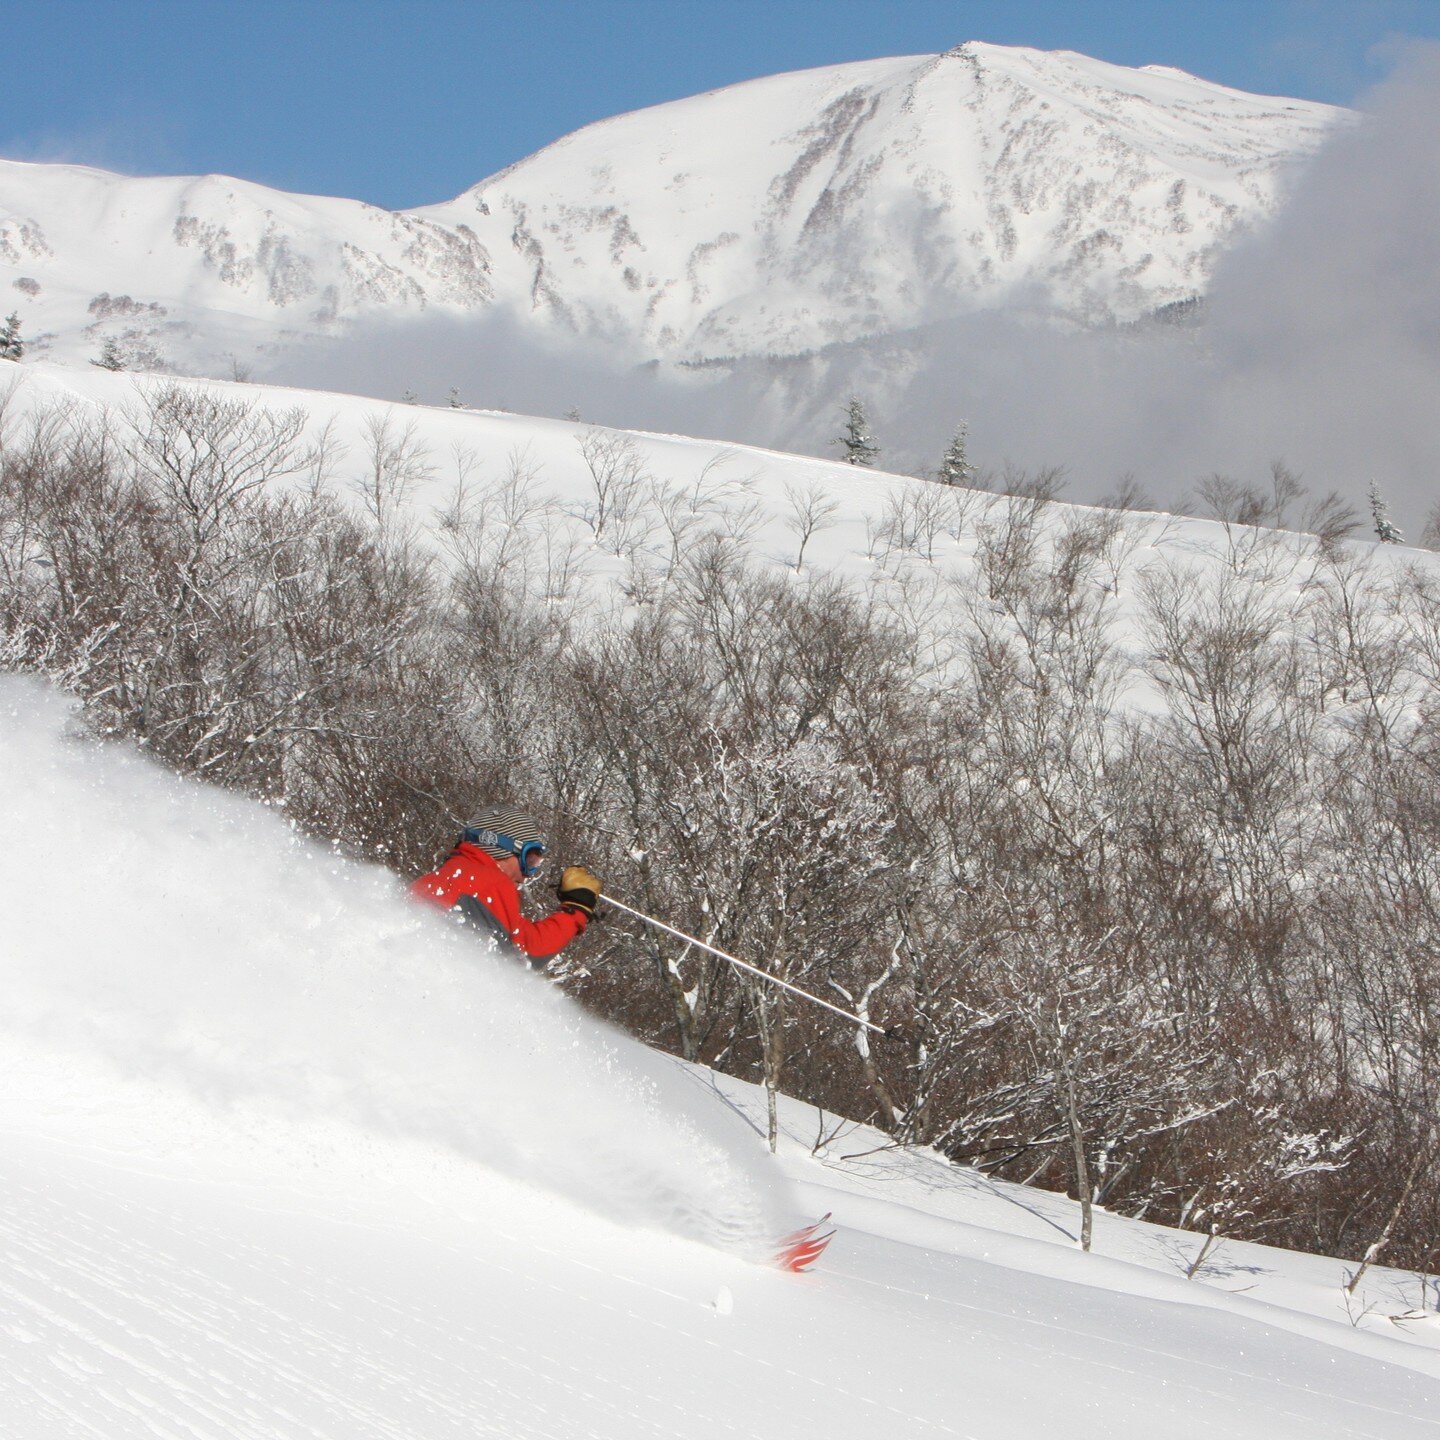 Hakuba has a Mega 10 Resorts, with terrain for all ability levels all on the one lift pass. Regardless of the type of terrain you like to ski or board, Hakuba has more of it than any other resort in Japan. Hakuba is located just 1 hours&rsquo; drive 